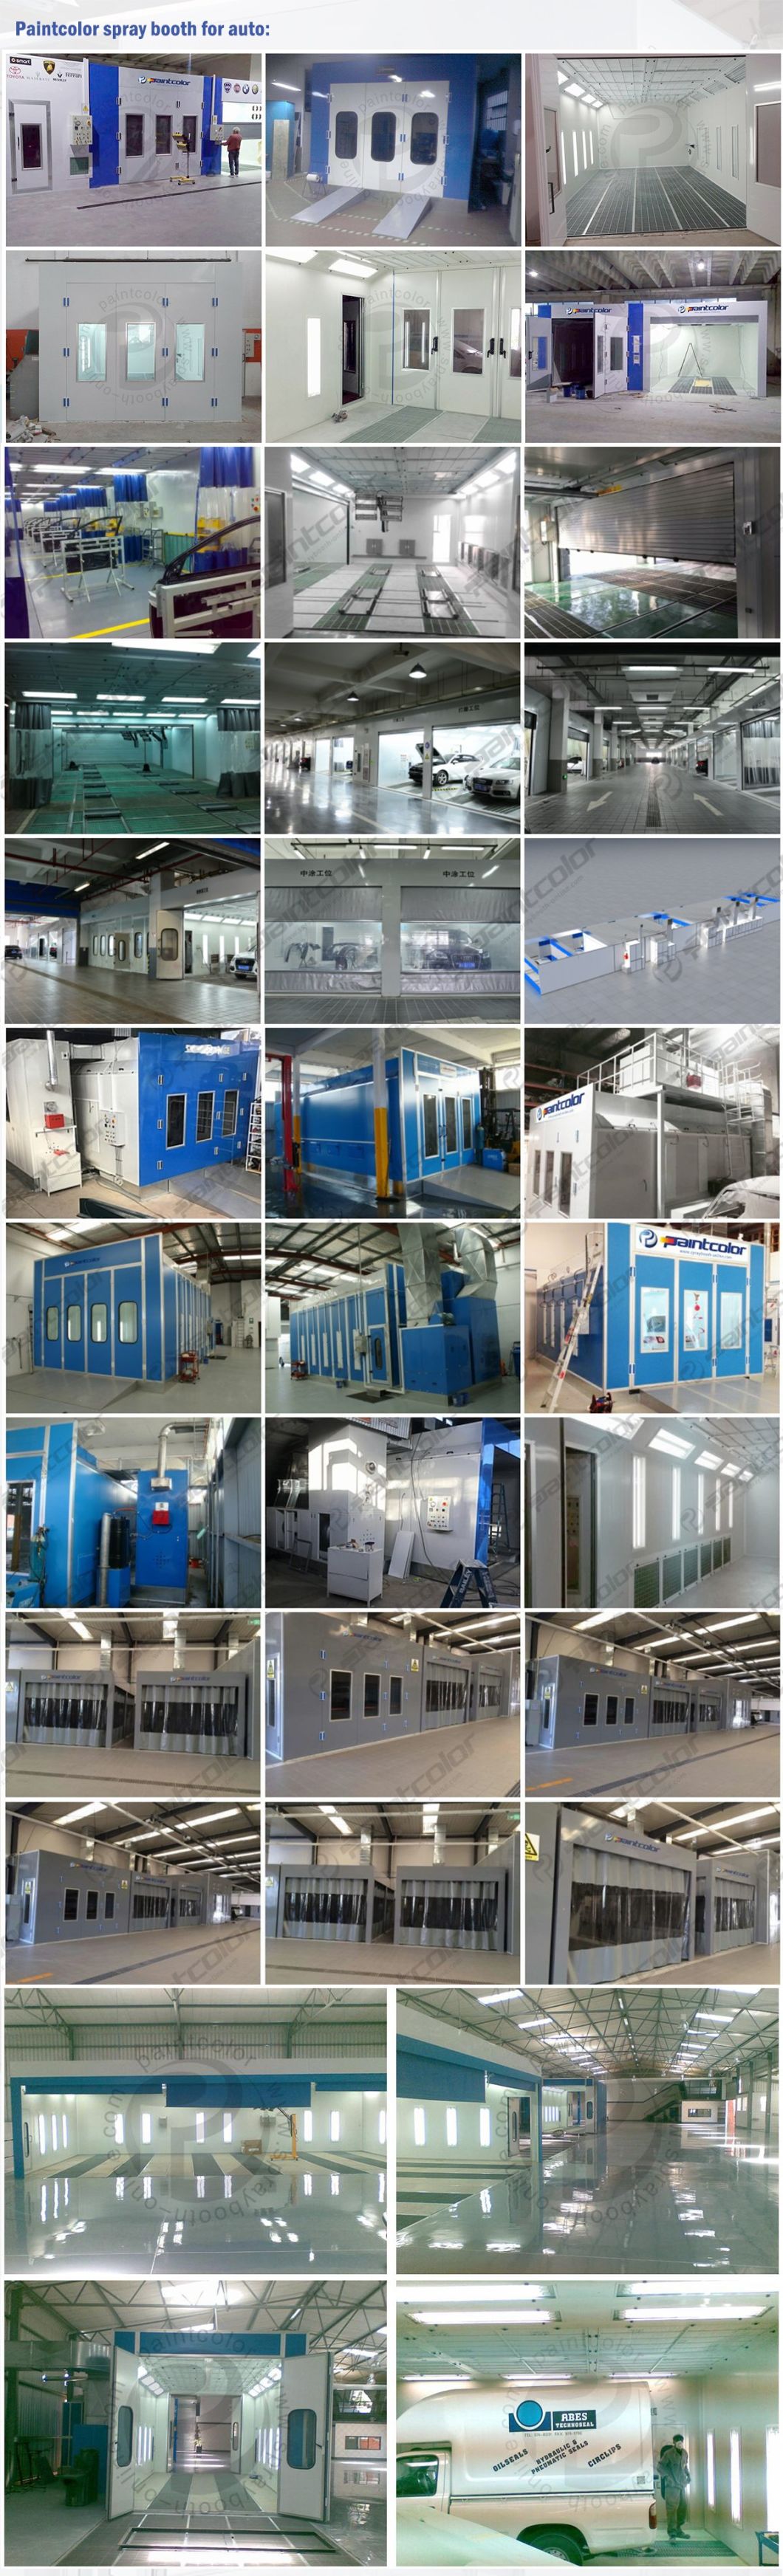 High Efficiency Metal Sheet Painting Coating Line Combination Spray Booth and Prep Station Bay Standby Paint Booth Paintcolor Brand